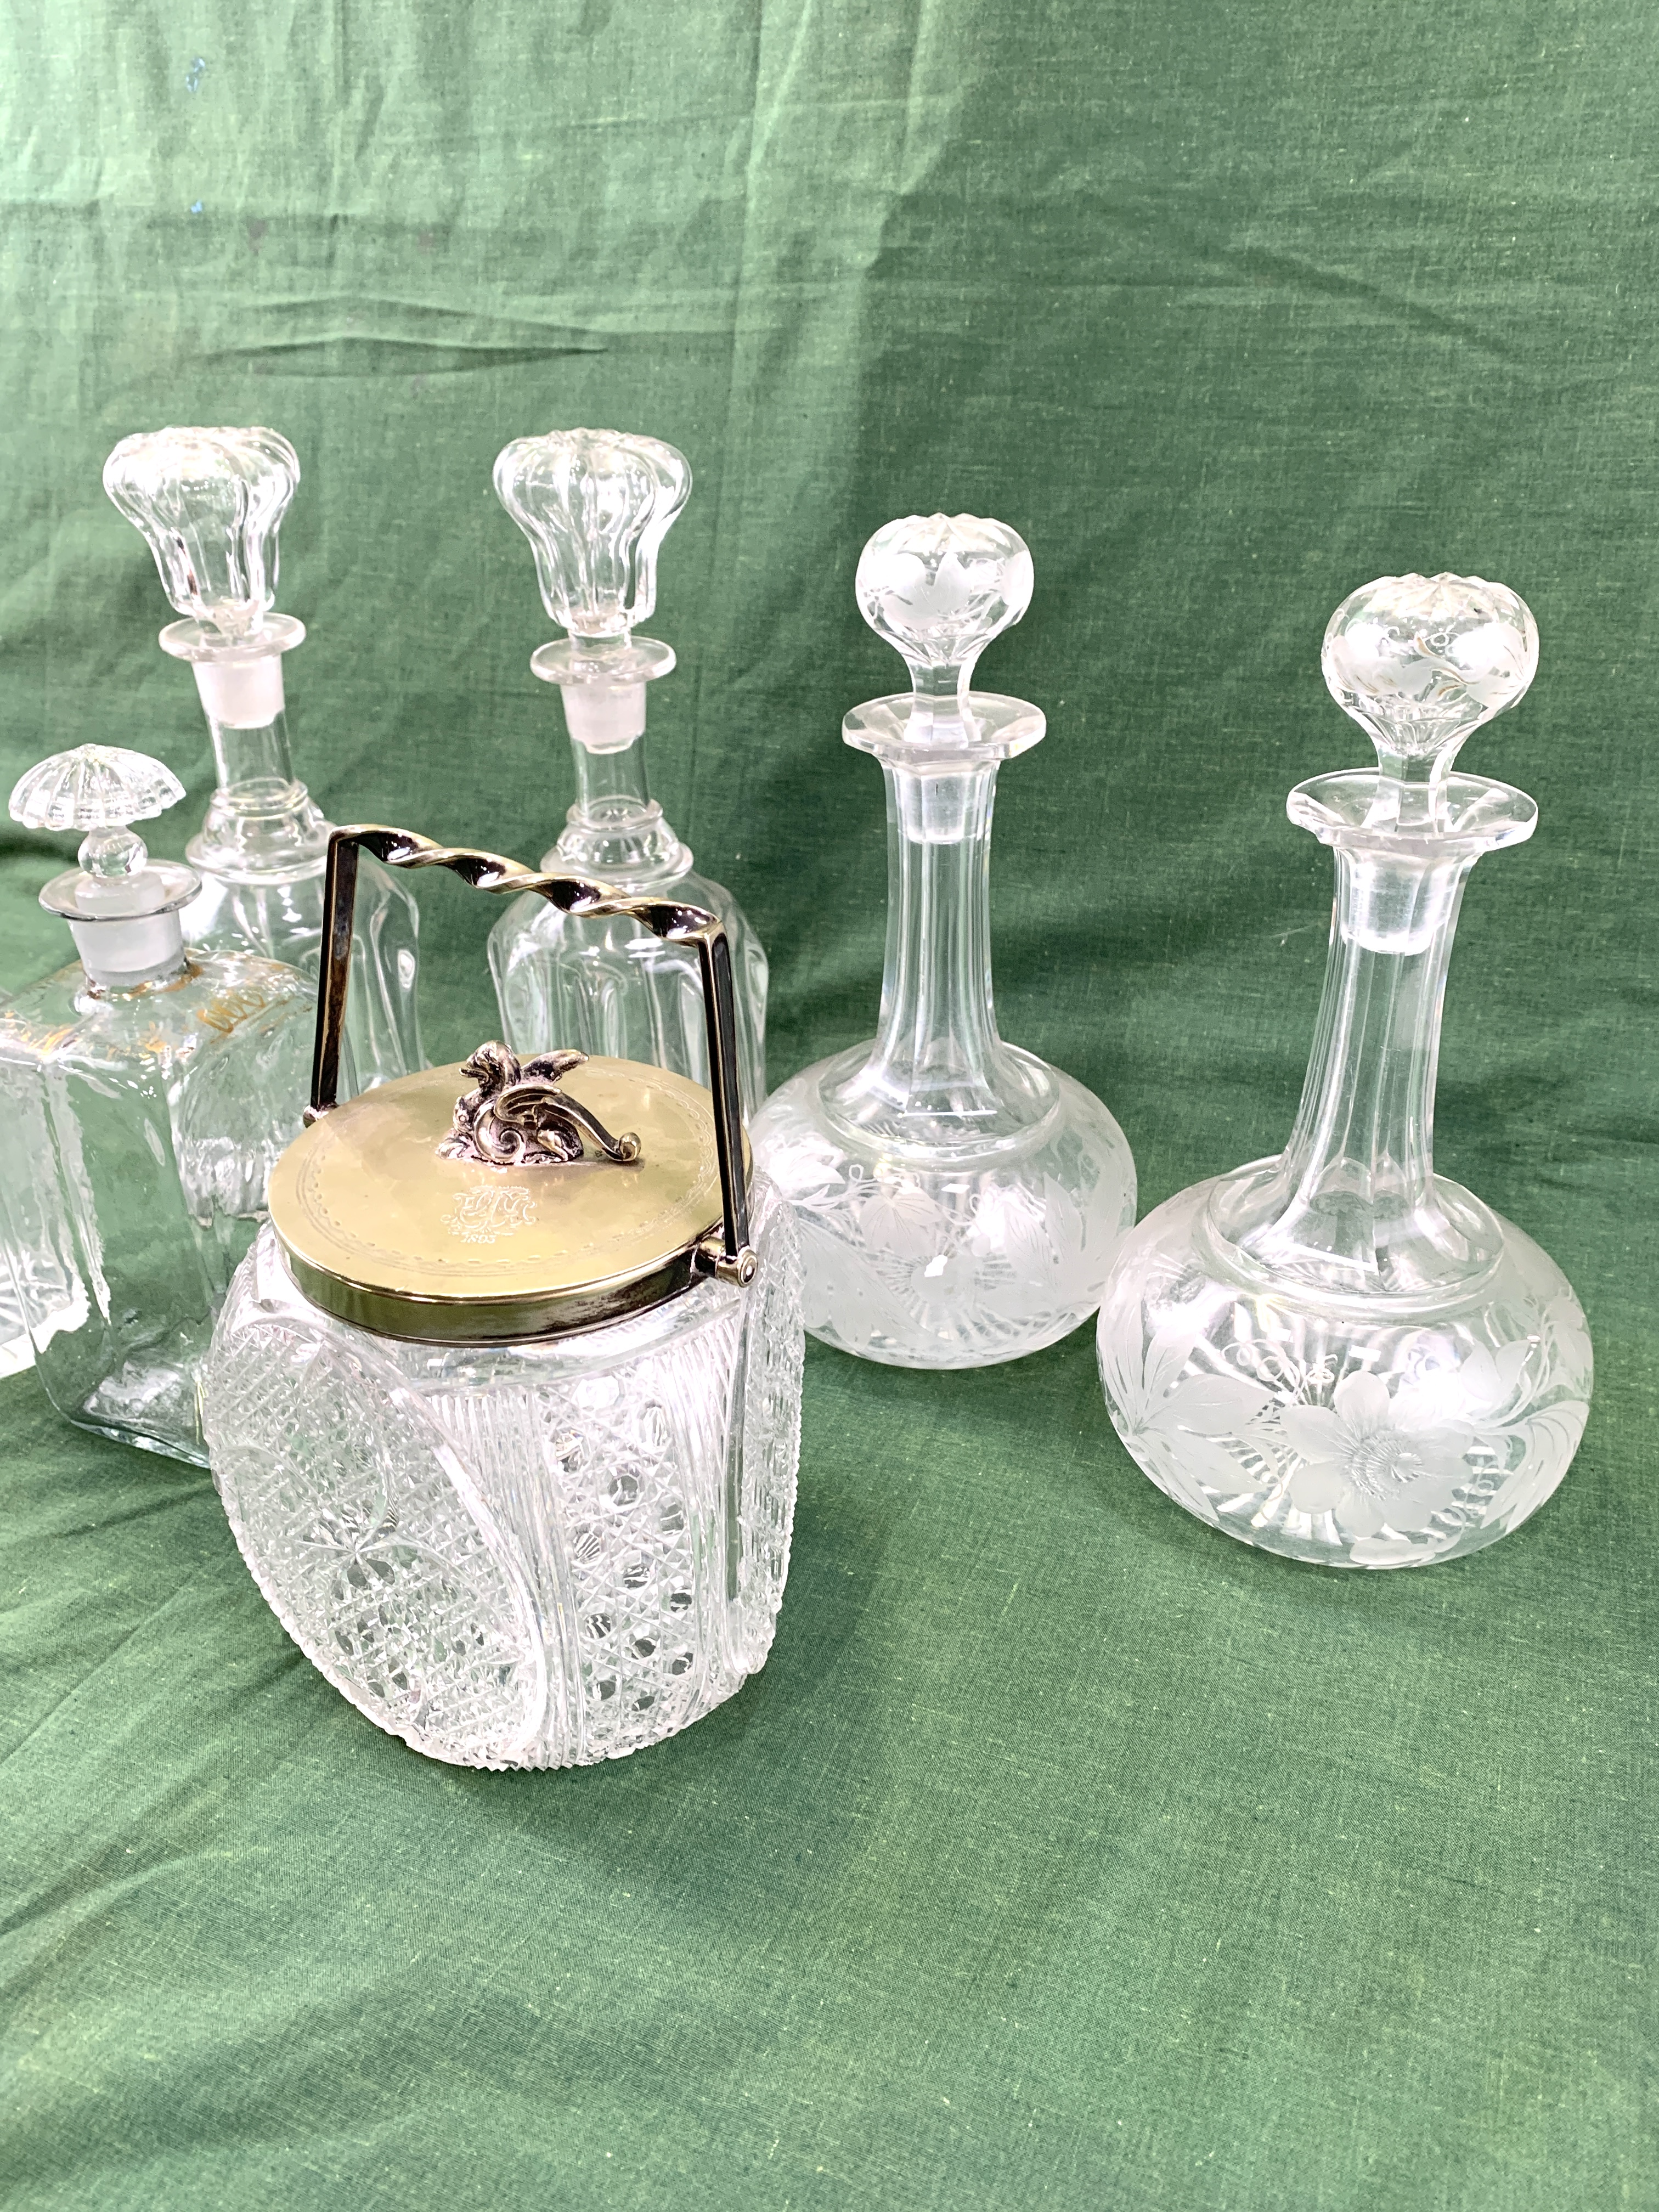 A pair of Victorian decanters, a pair of Edwardian decanters, and a cut glass biscuit barrel - Image 2 of 6